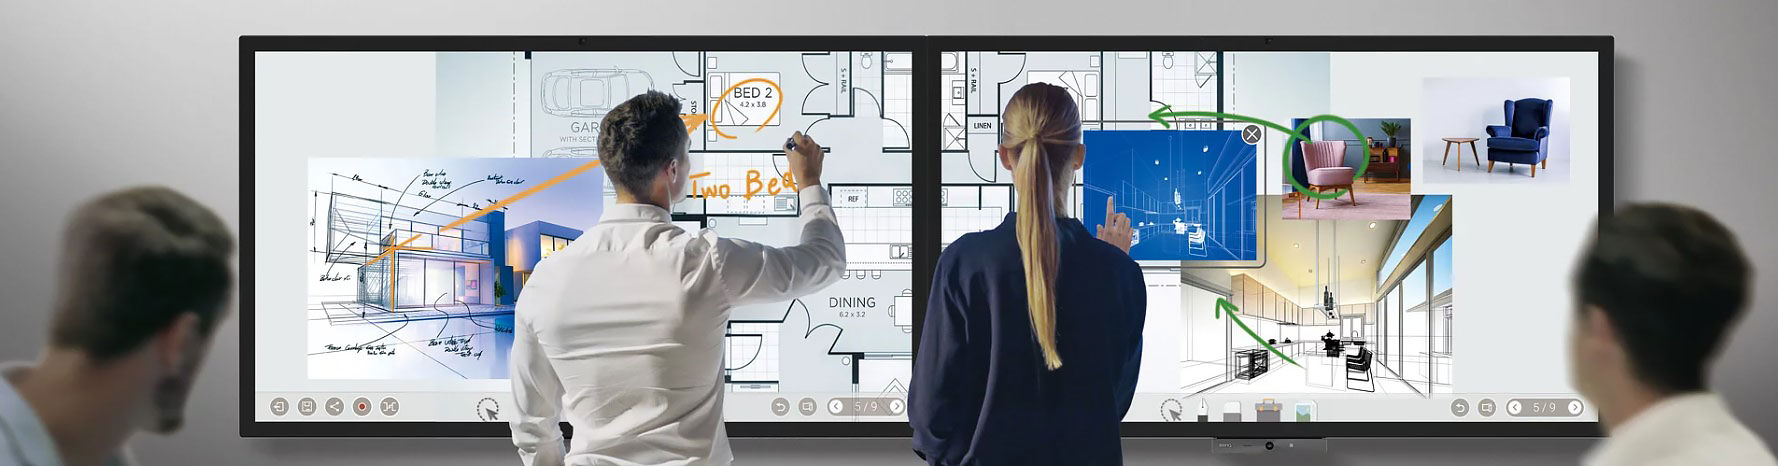 State-of-the-art interactive screens for engaging presentations - Mitronics